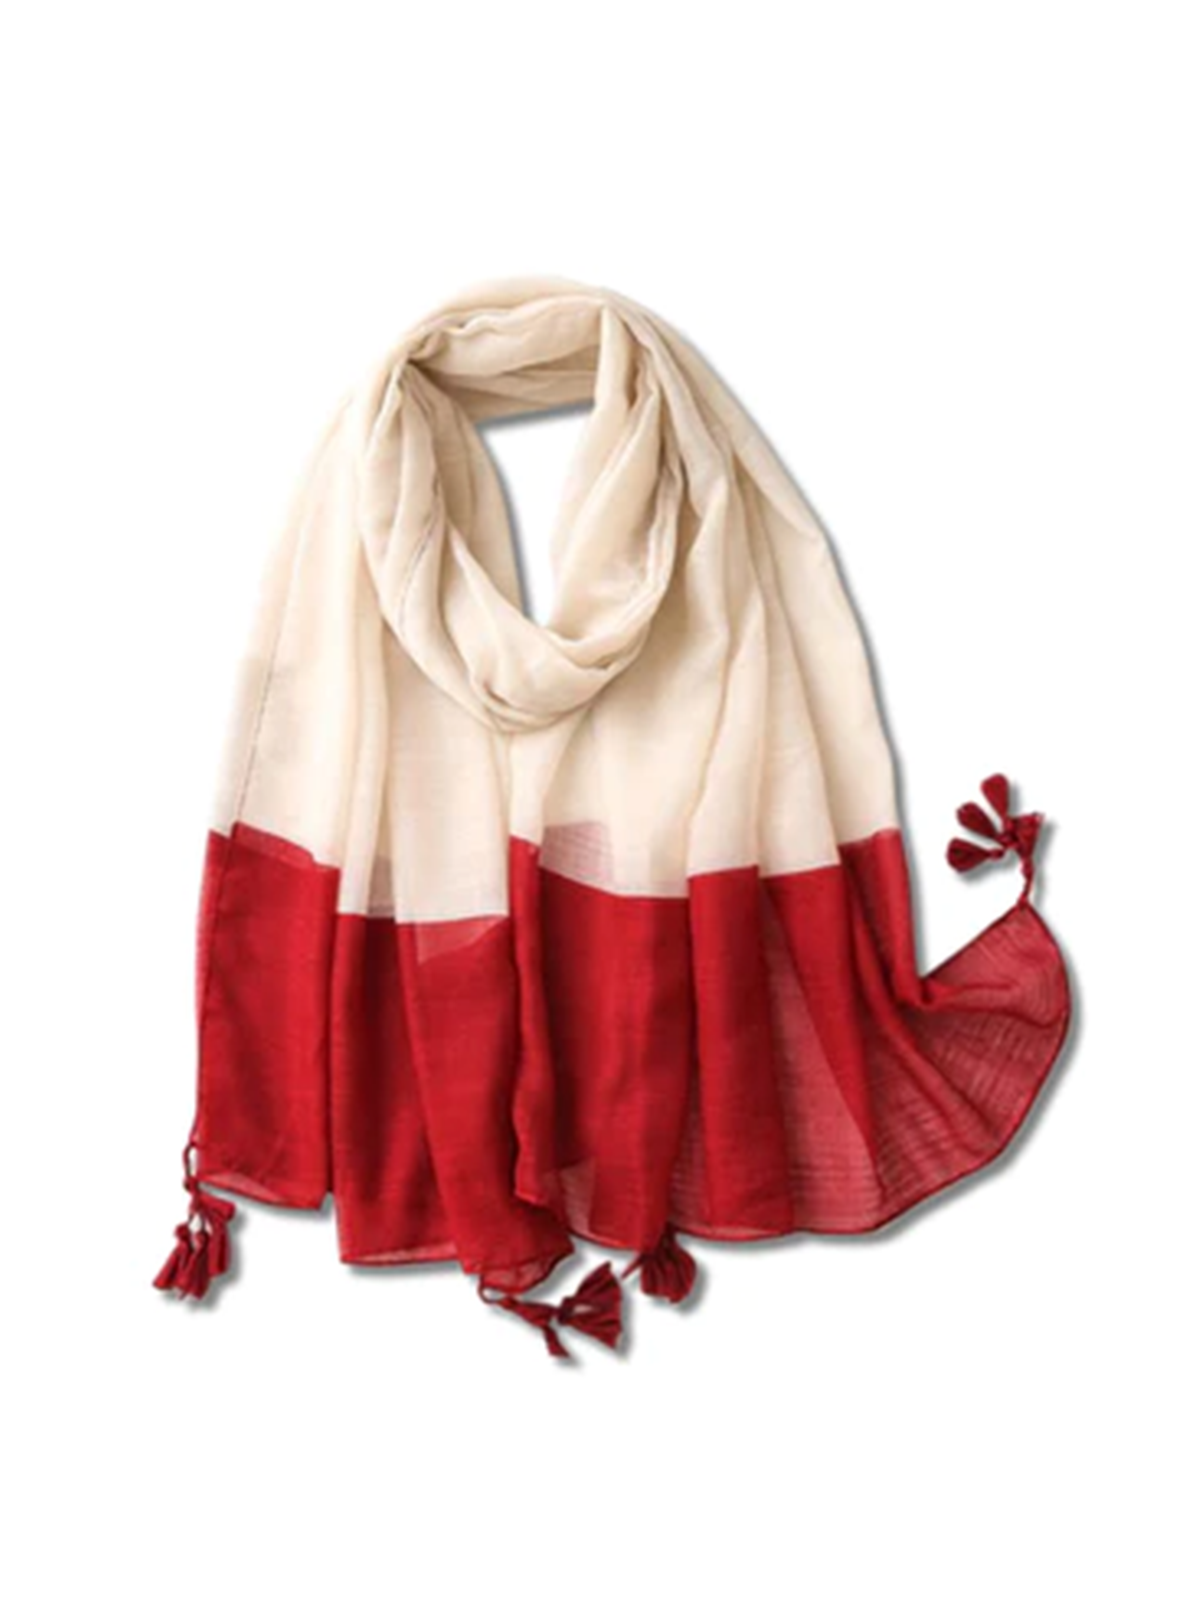 Scarf with red and white tassel at the ends